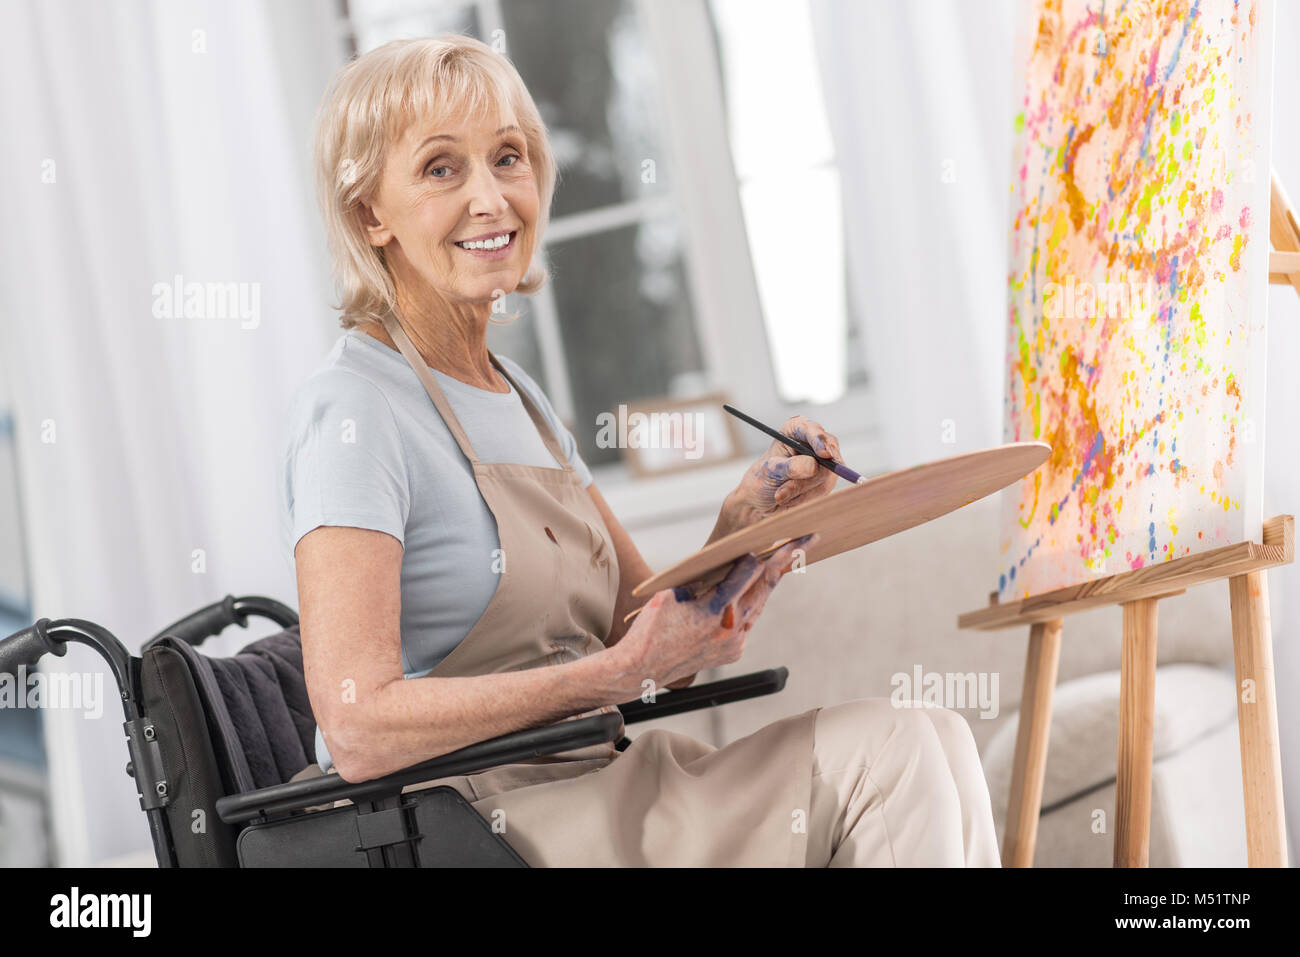 Mature handicapped woman improving herself Stock Photo